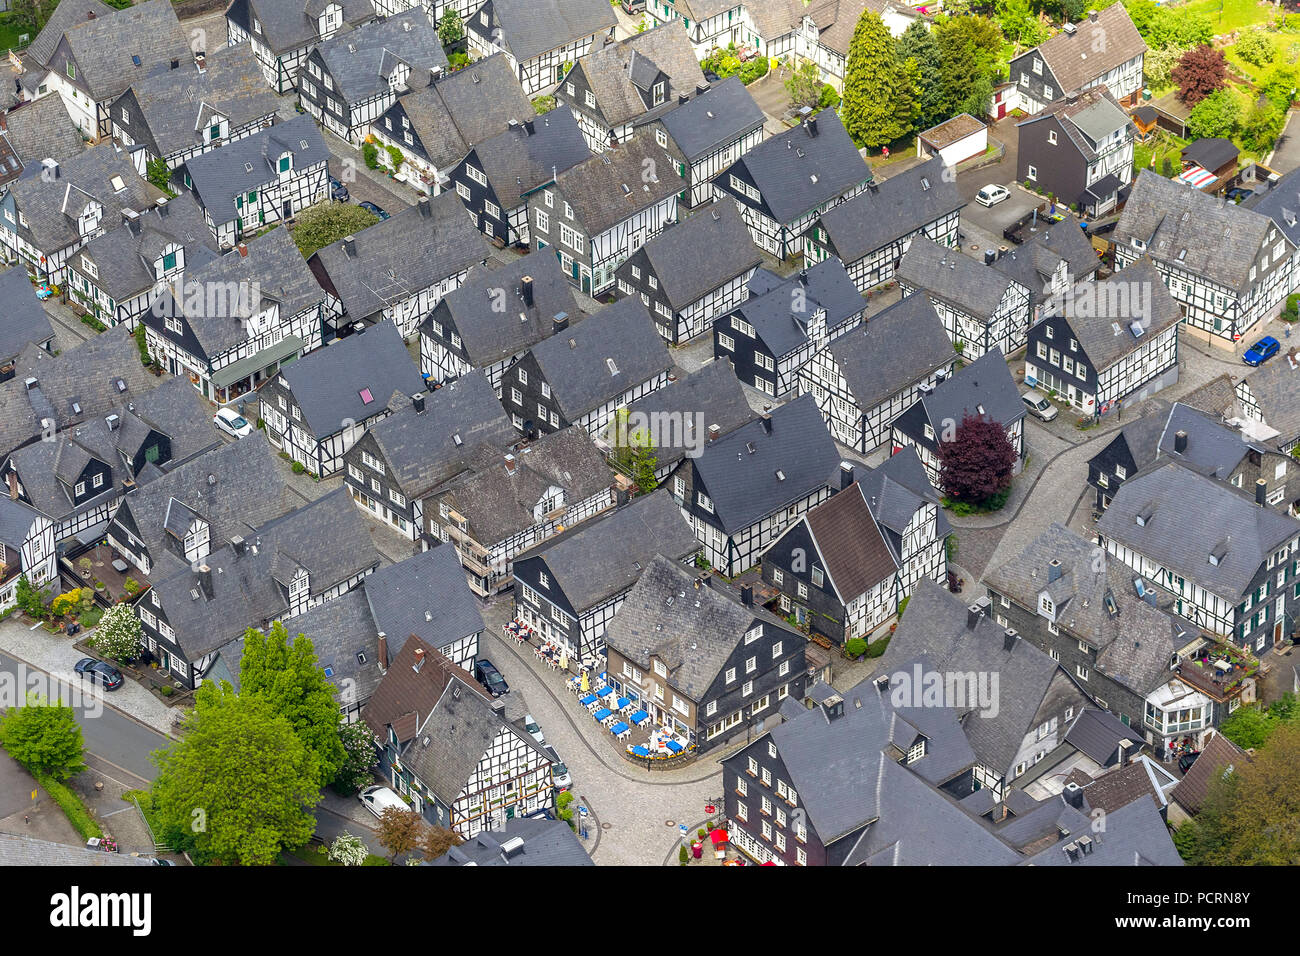 Am Alten Flecken, old town of Freudenberg, half-timbered houses, aerial view of Freudenberg Stock Photo